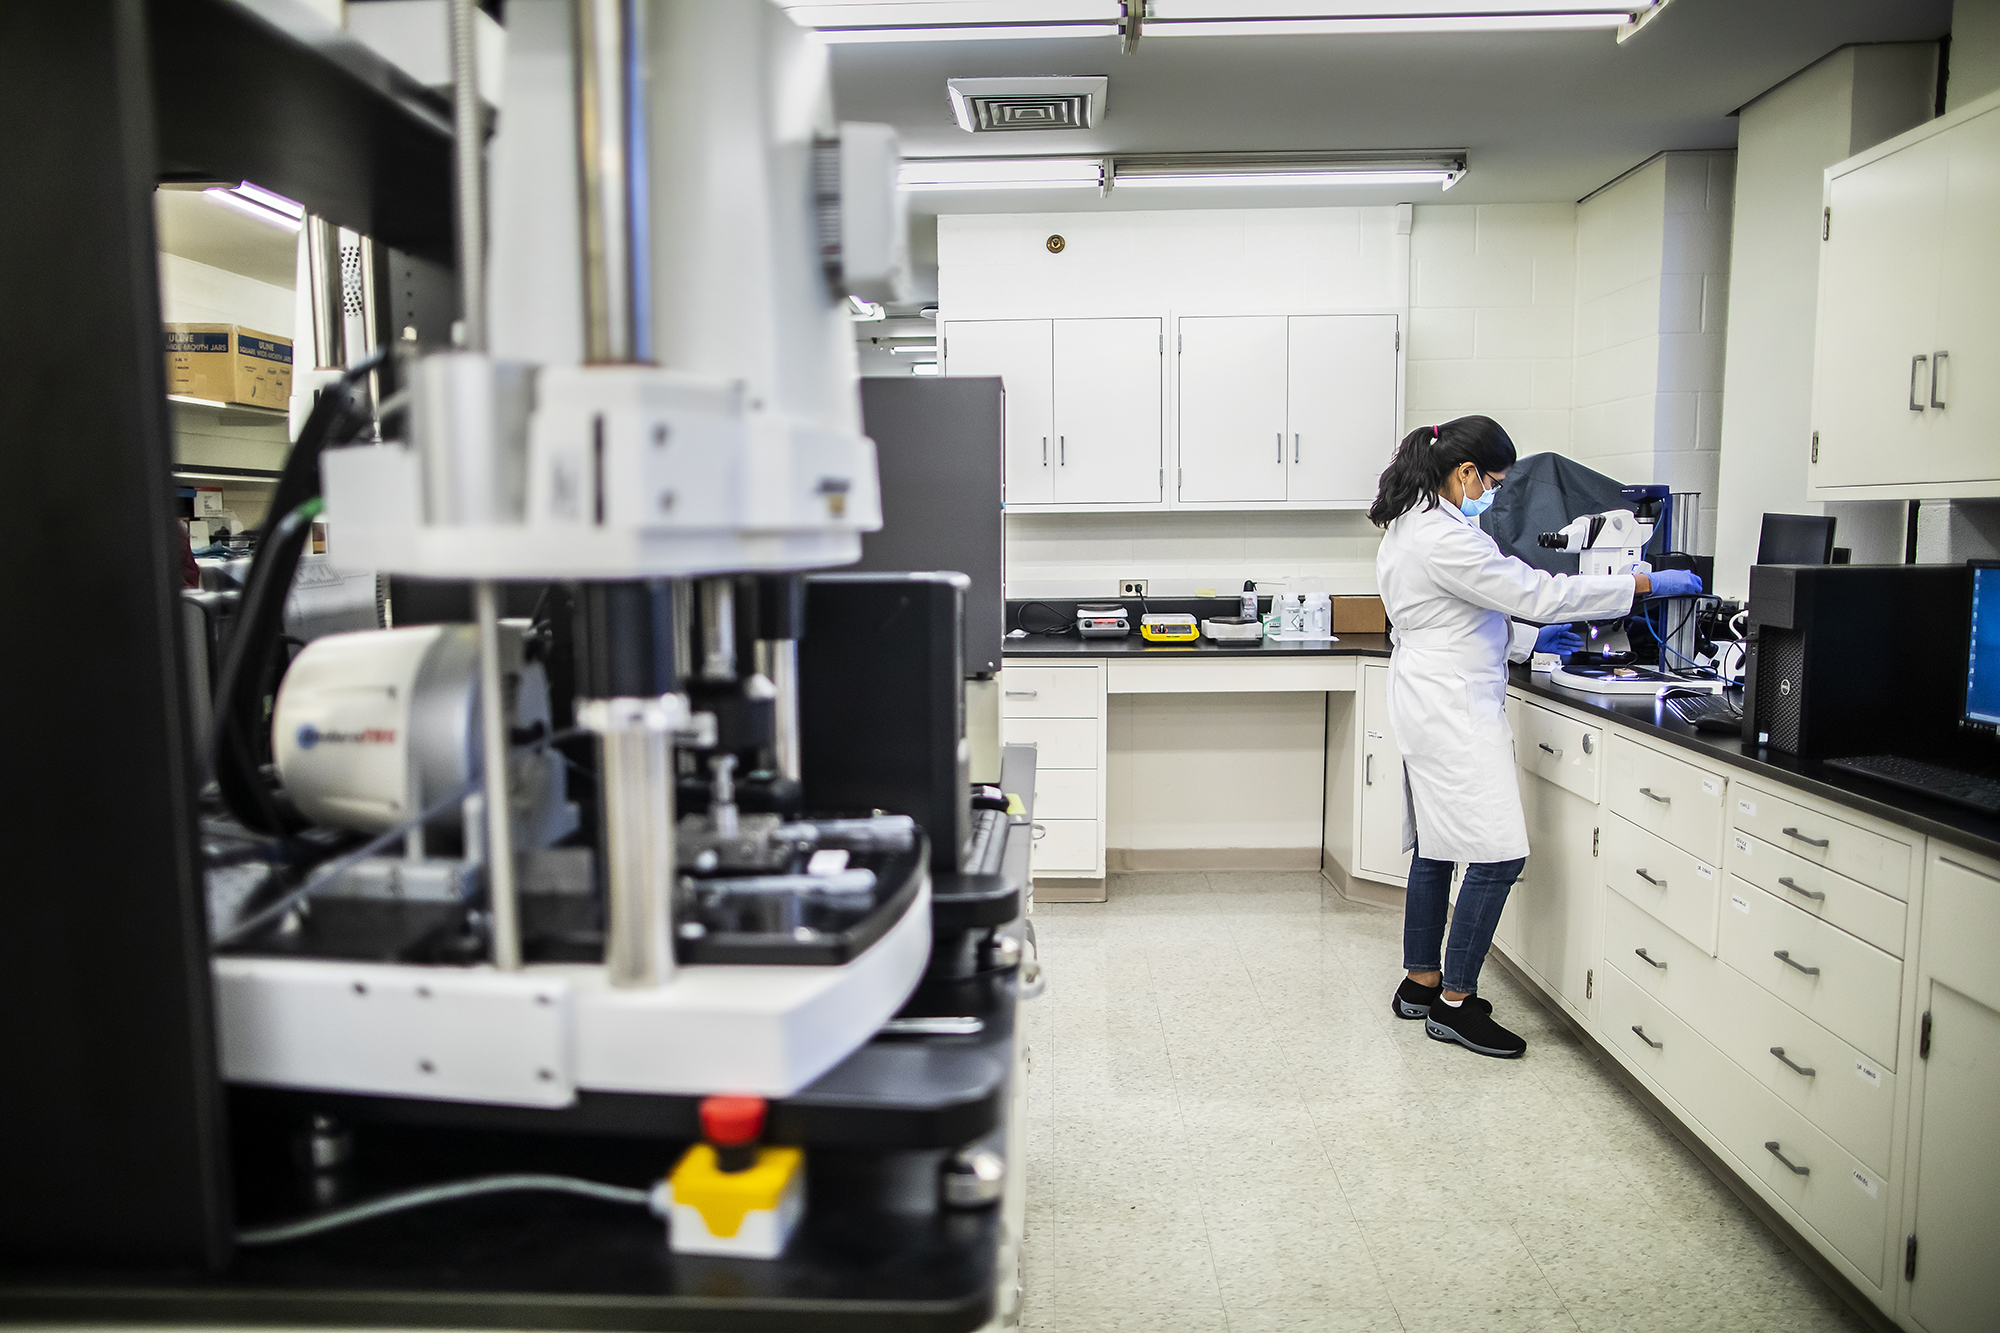 researcher in lab looks through microscope in background, framed by lab equipment in foreground